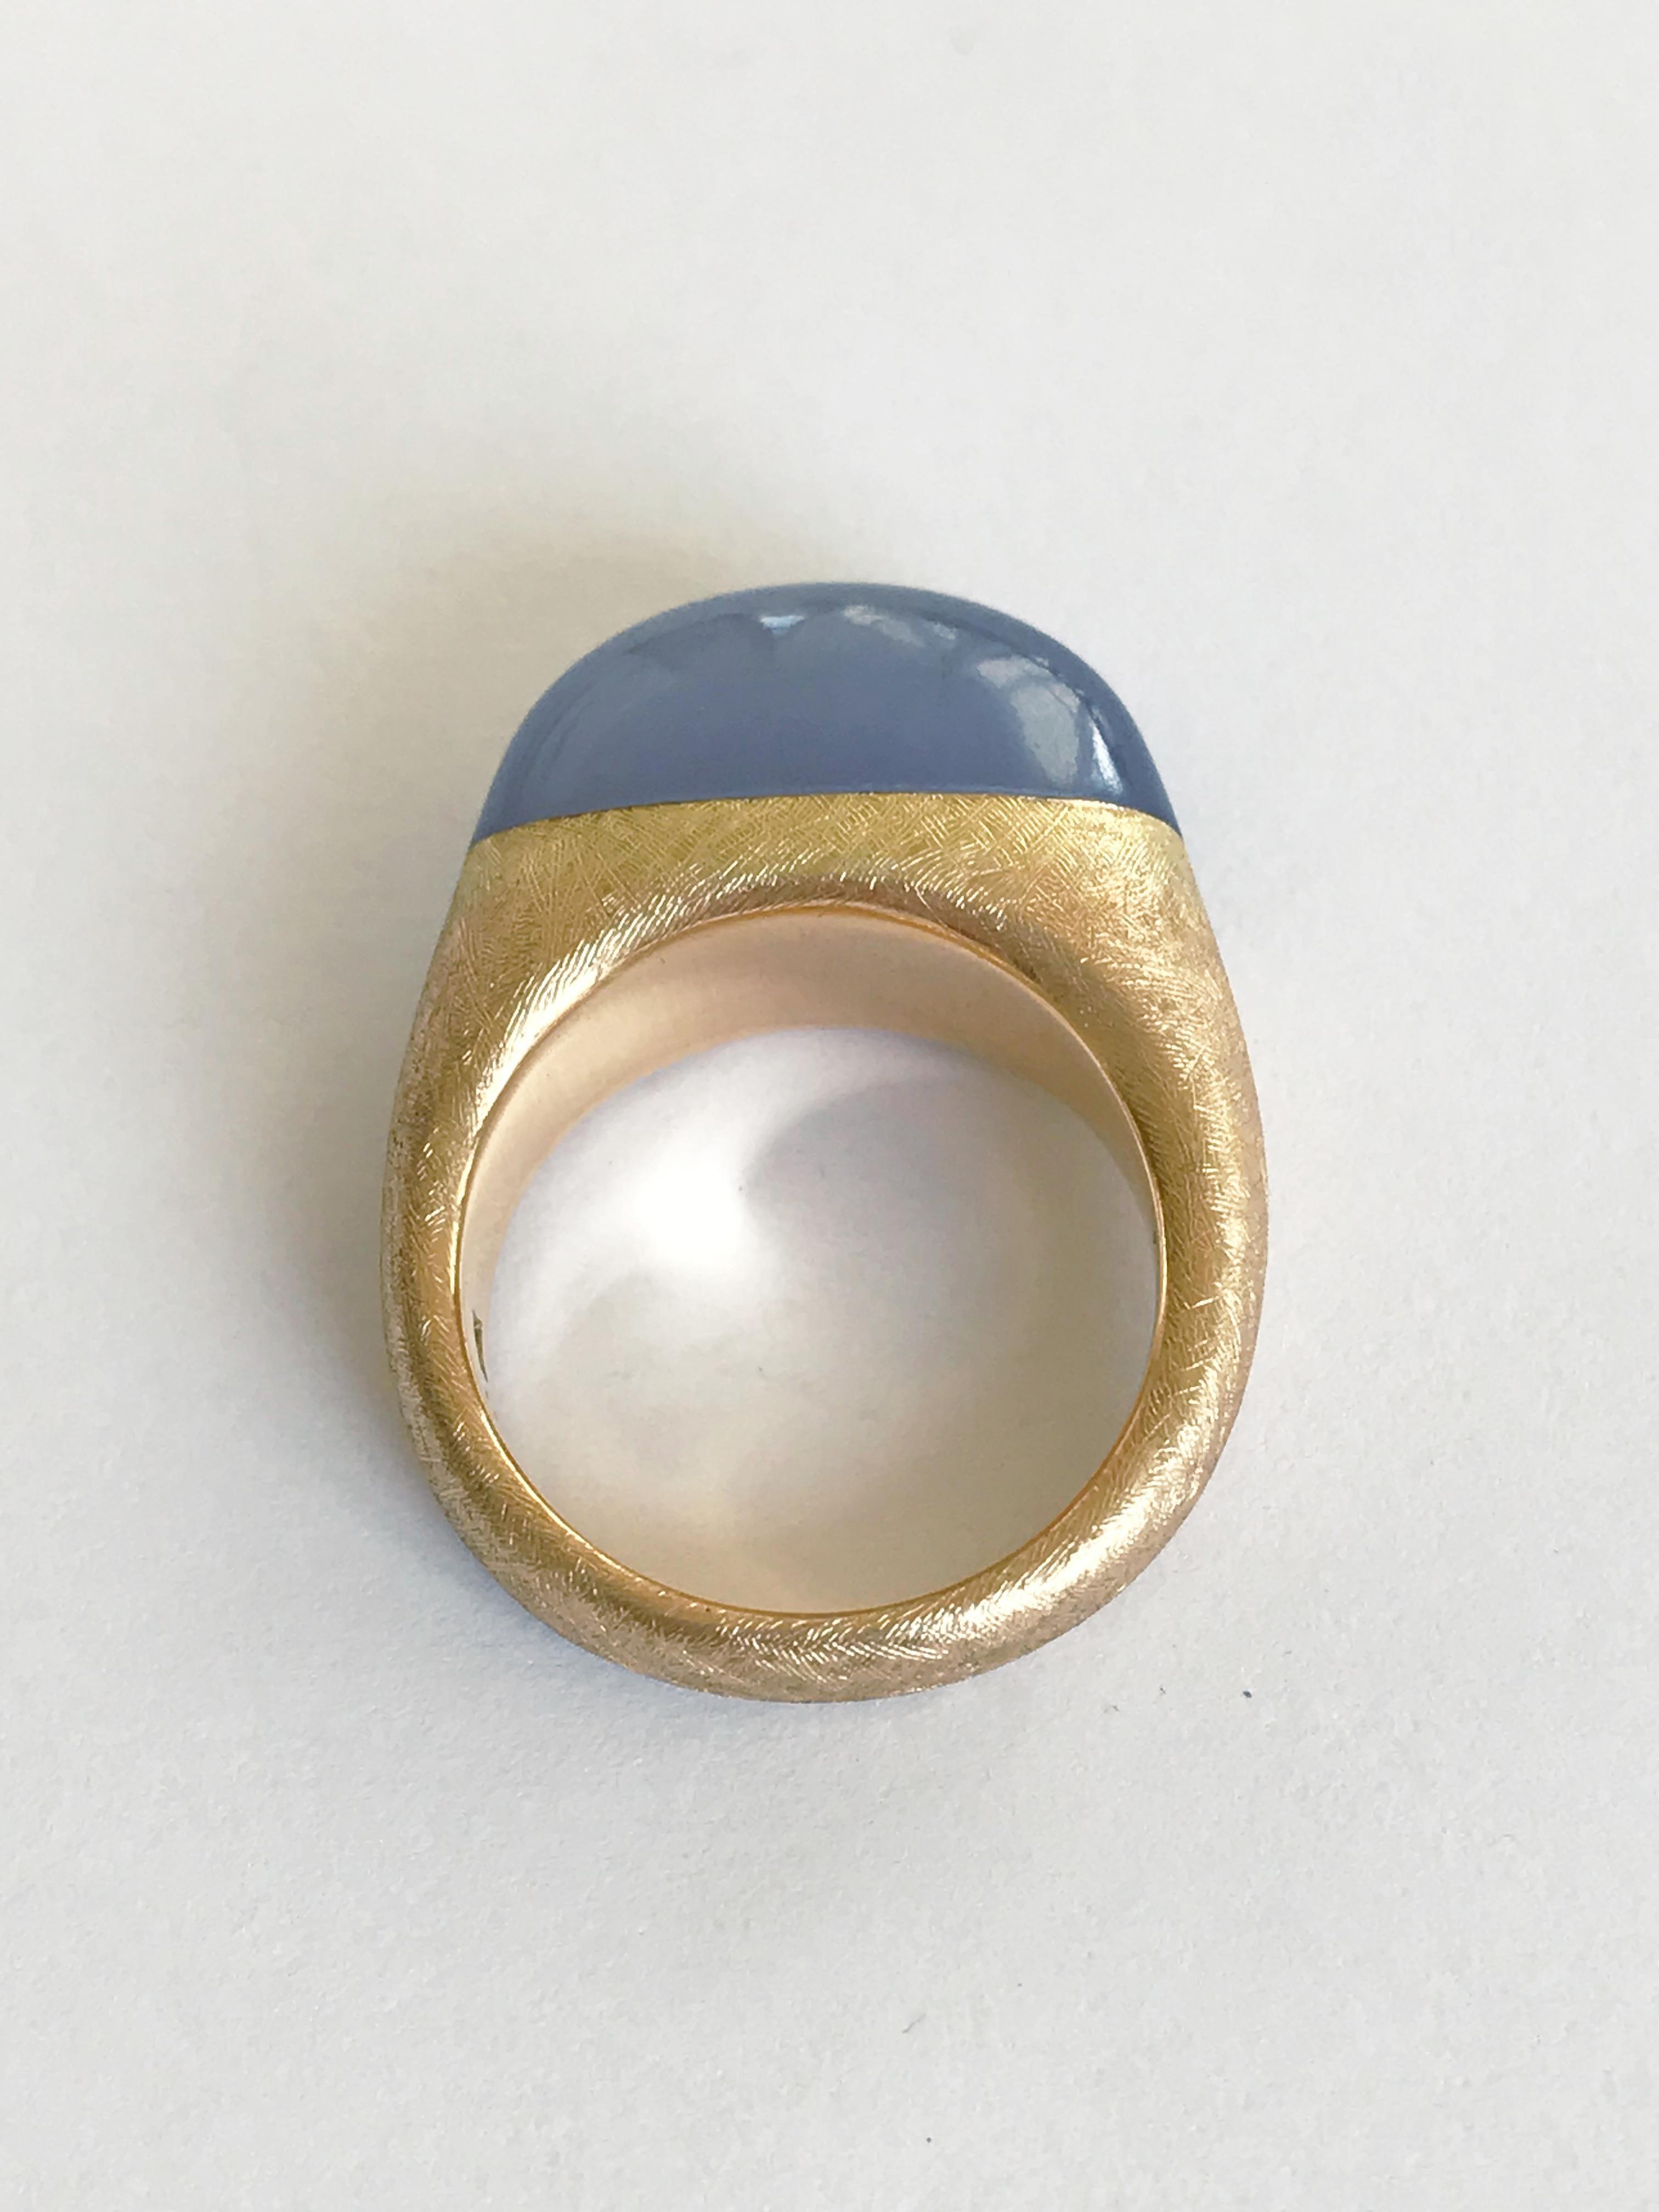 Cabochon Dalben Namibian Chalcedony Gold Ring For Sale